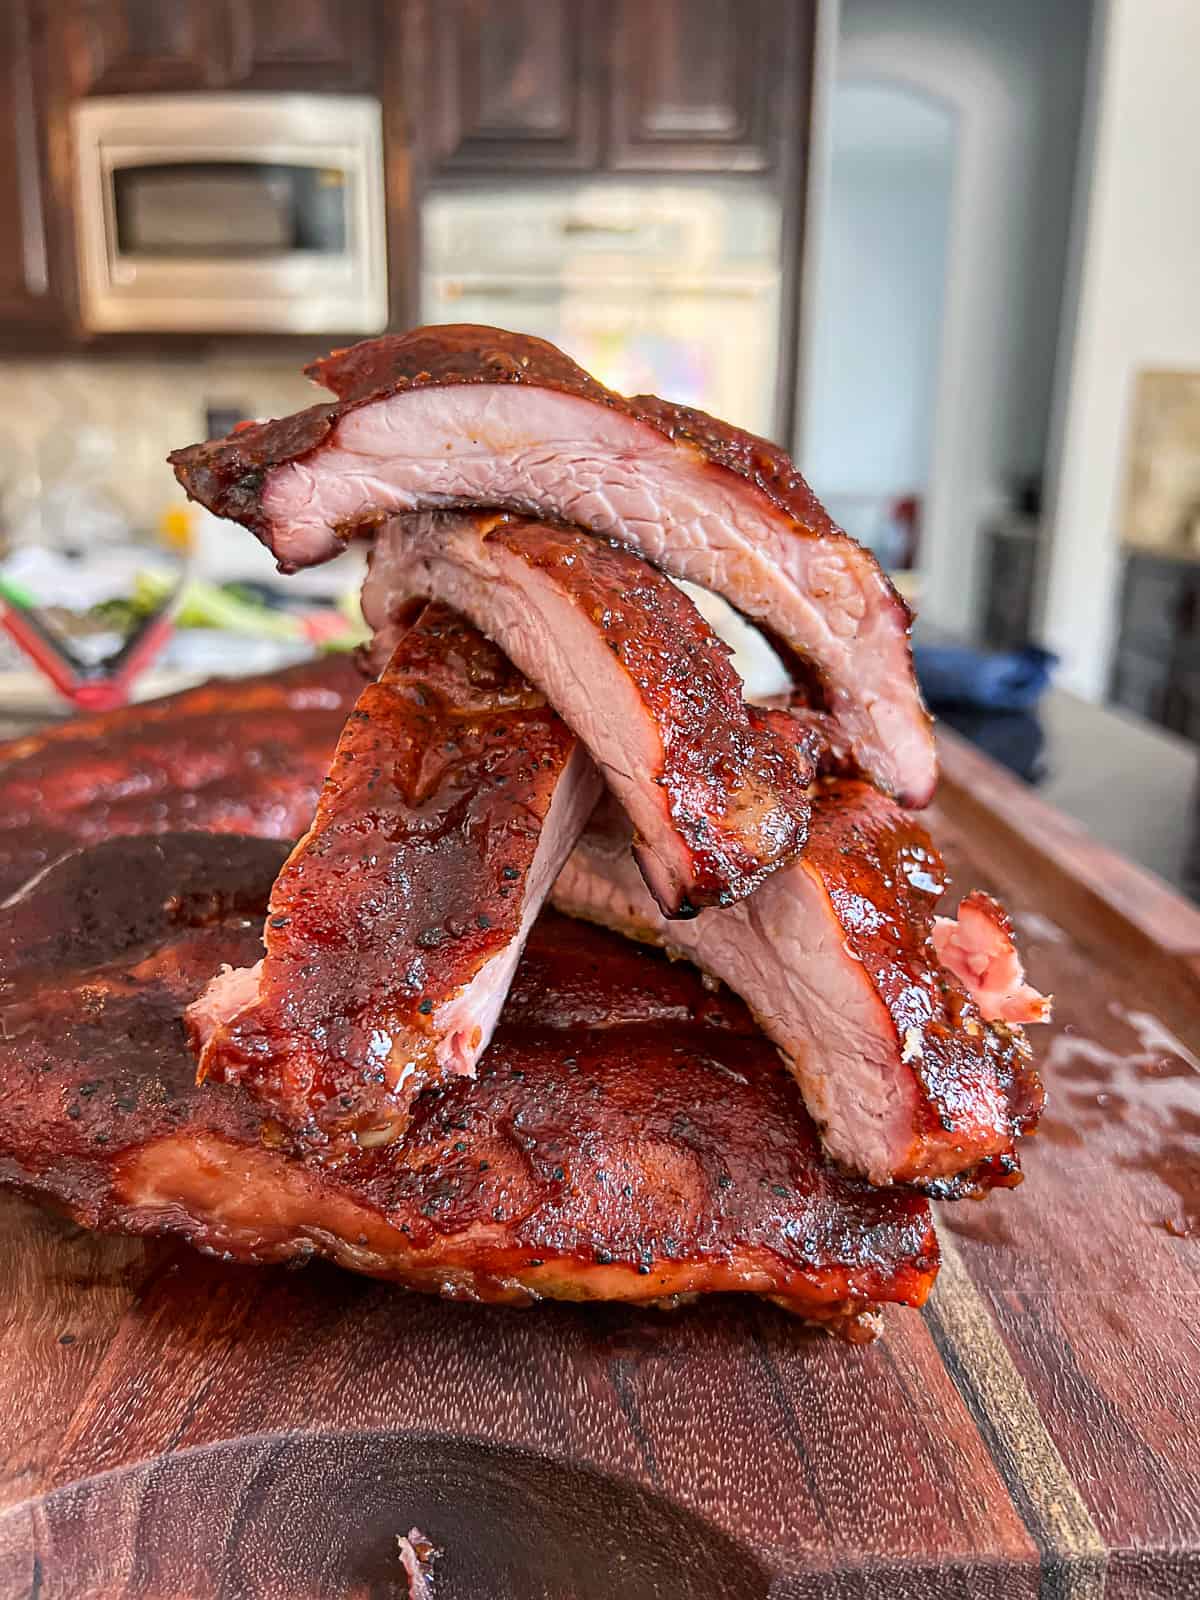 Individual smoked pork ribs done 321 style on the Treager pellet grill